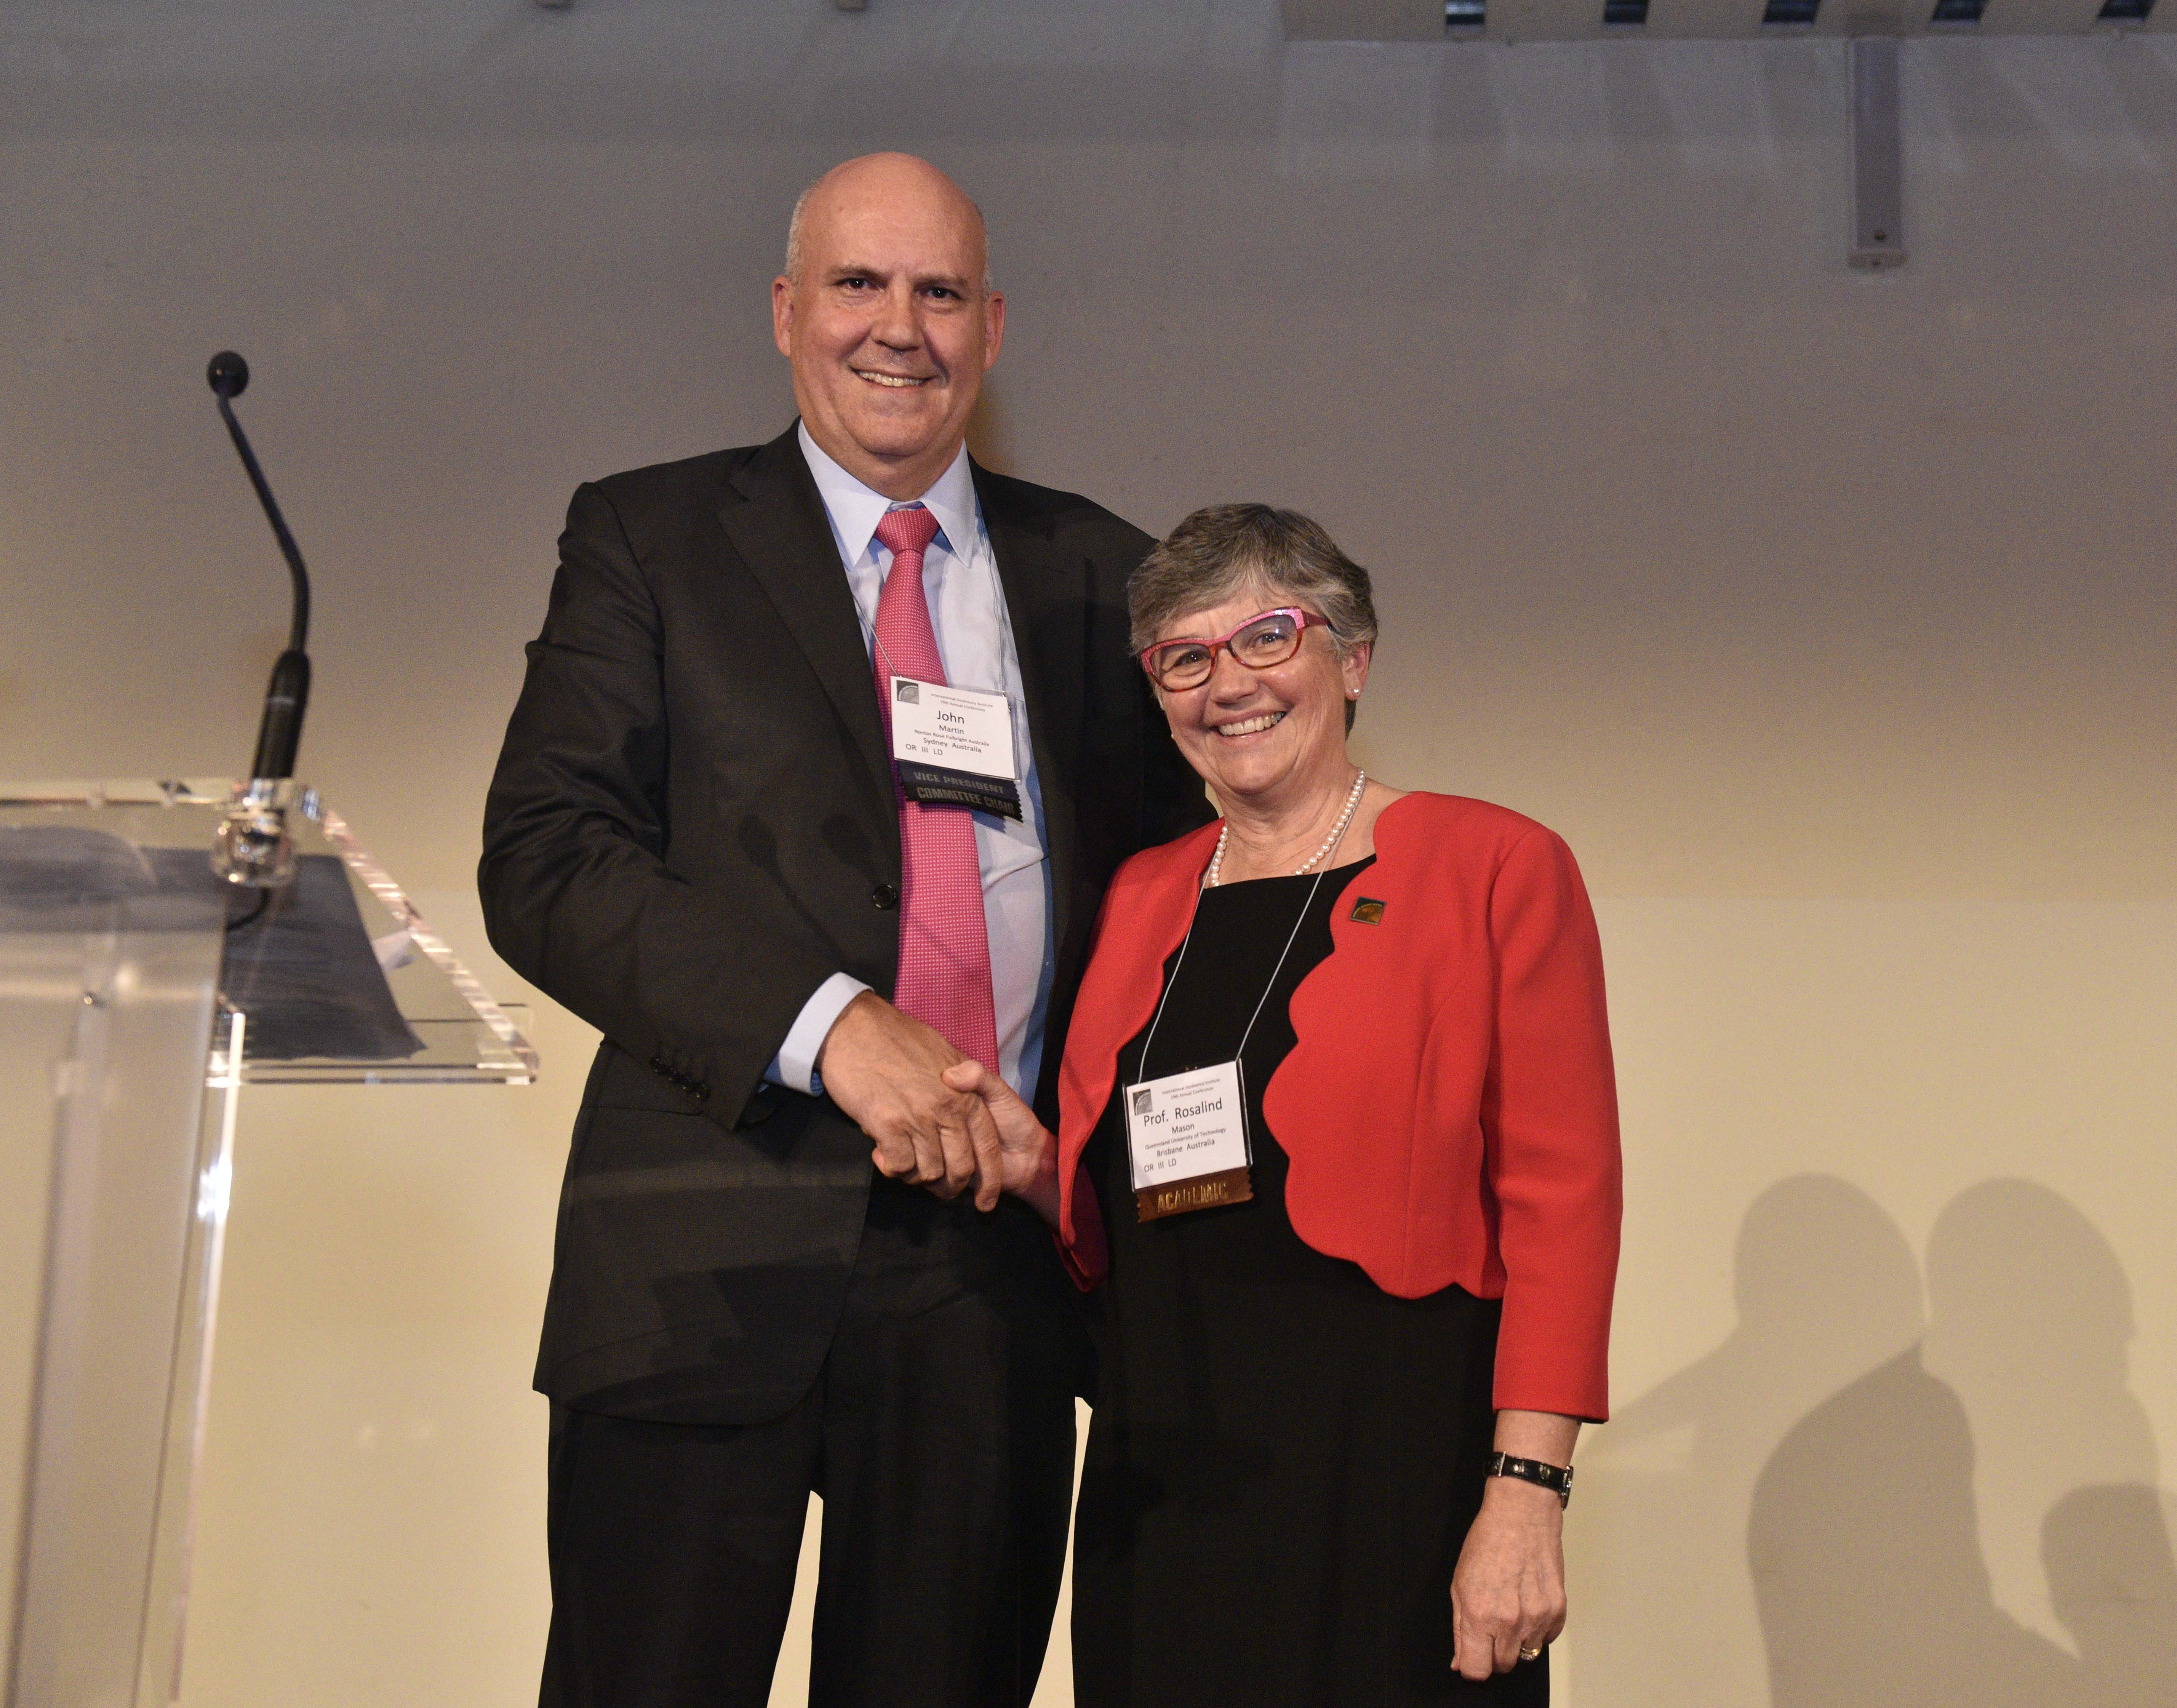 John Martin, Partner, Norton Rose Fulbright and Vice-President of the International Insolvency Institute, presenting Professor Mason with the Founders Award at the III annual conference in Barcelona.